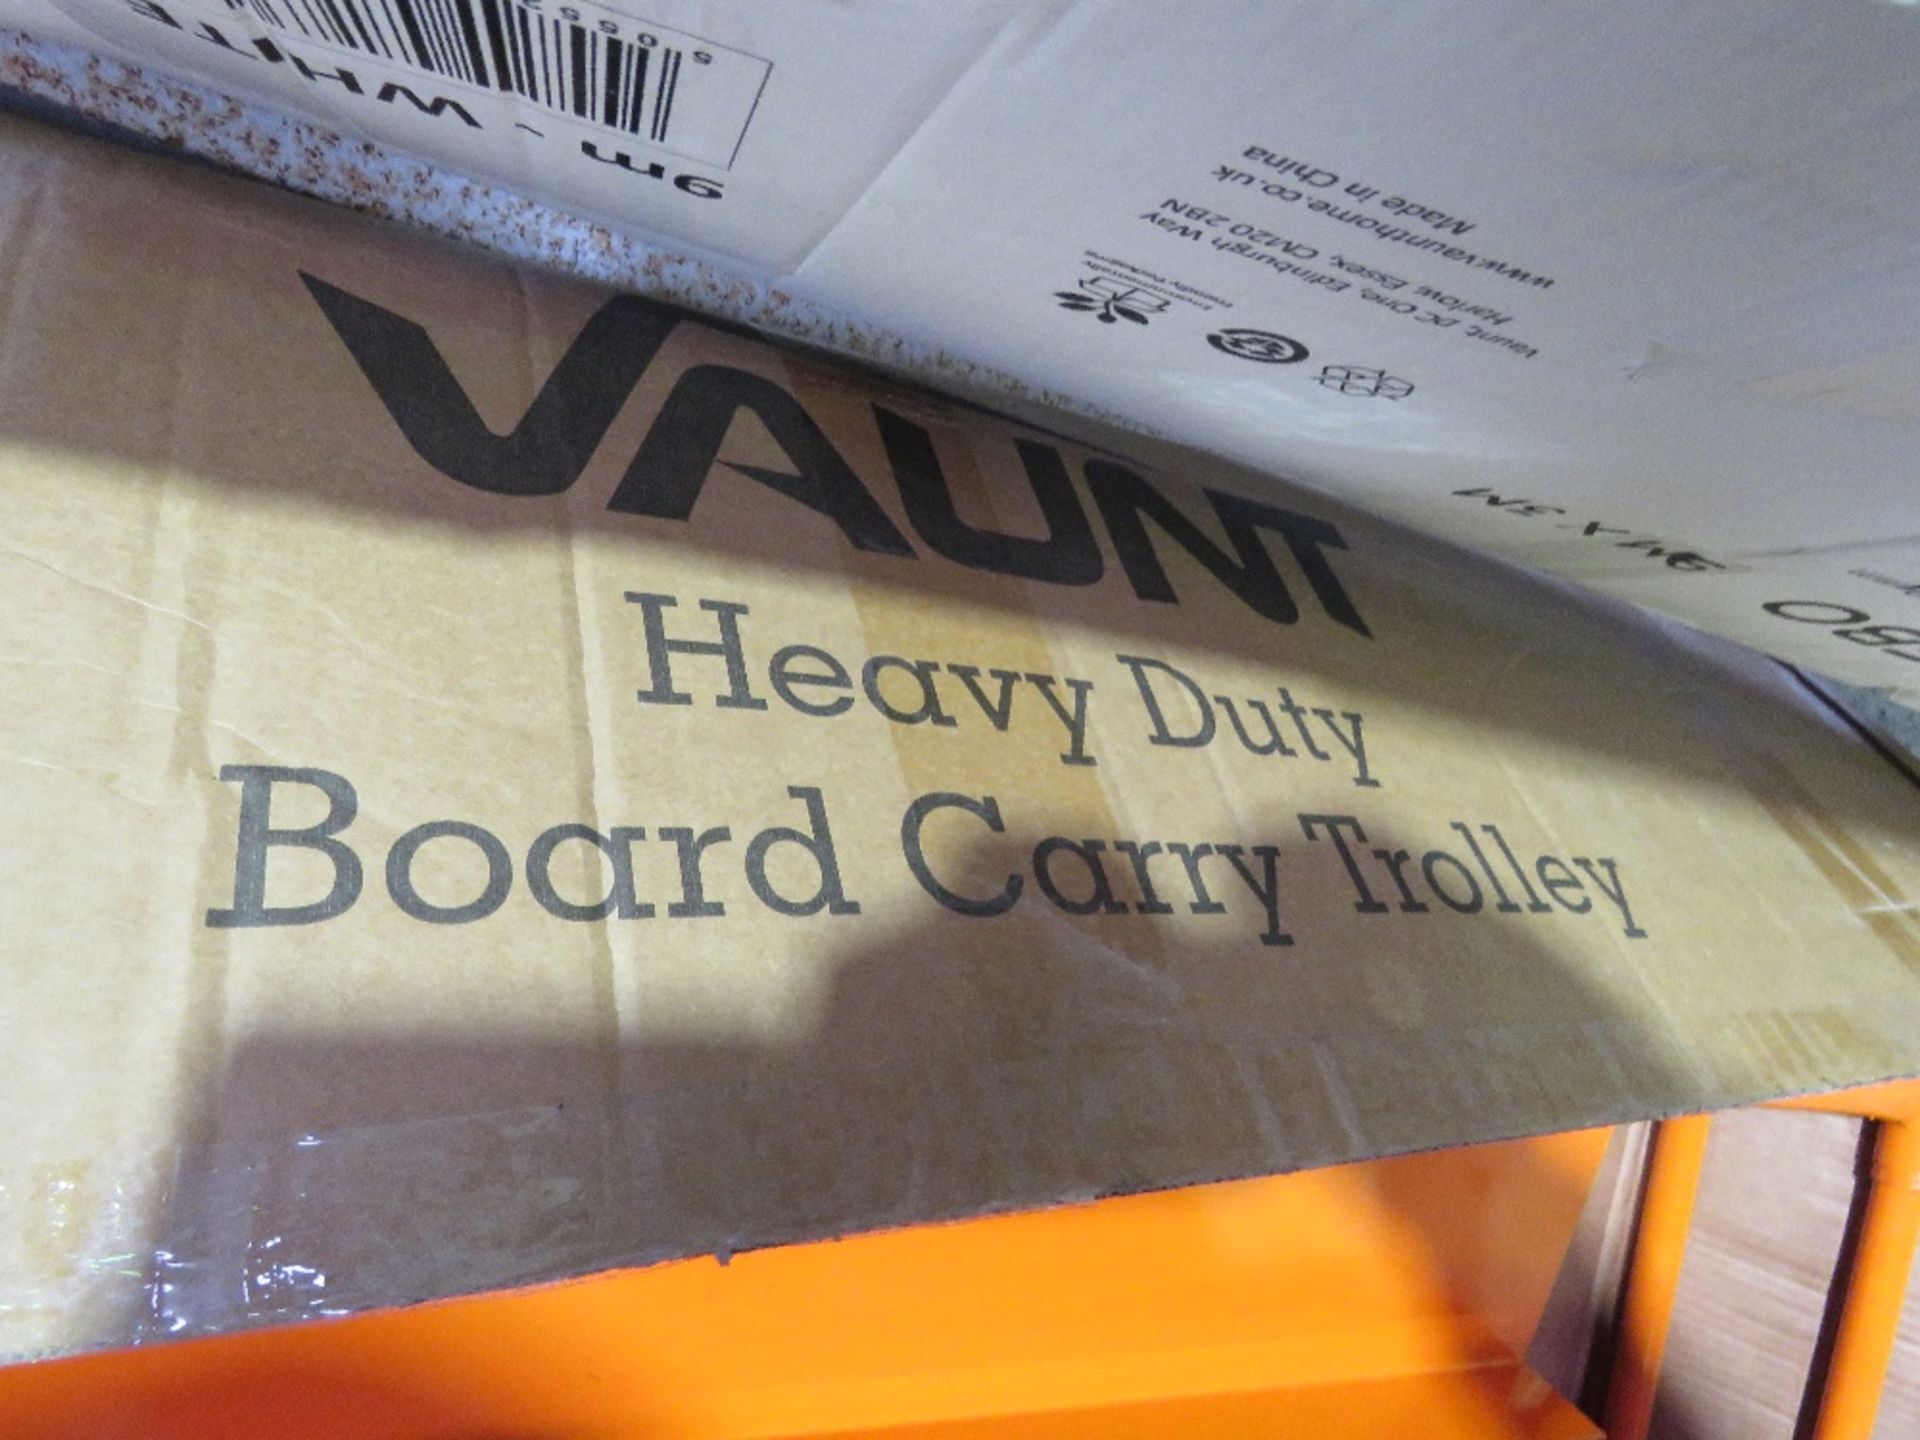 HEAVY DUTY BOARD CARRYING TROLLEY IN A BOX, CONDITION UNKNOWN. - Image 4 of 4